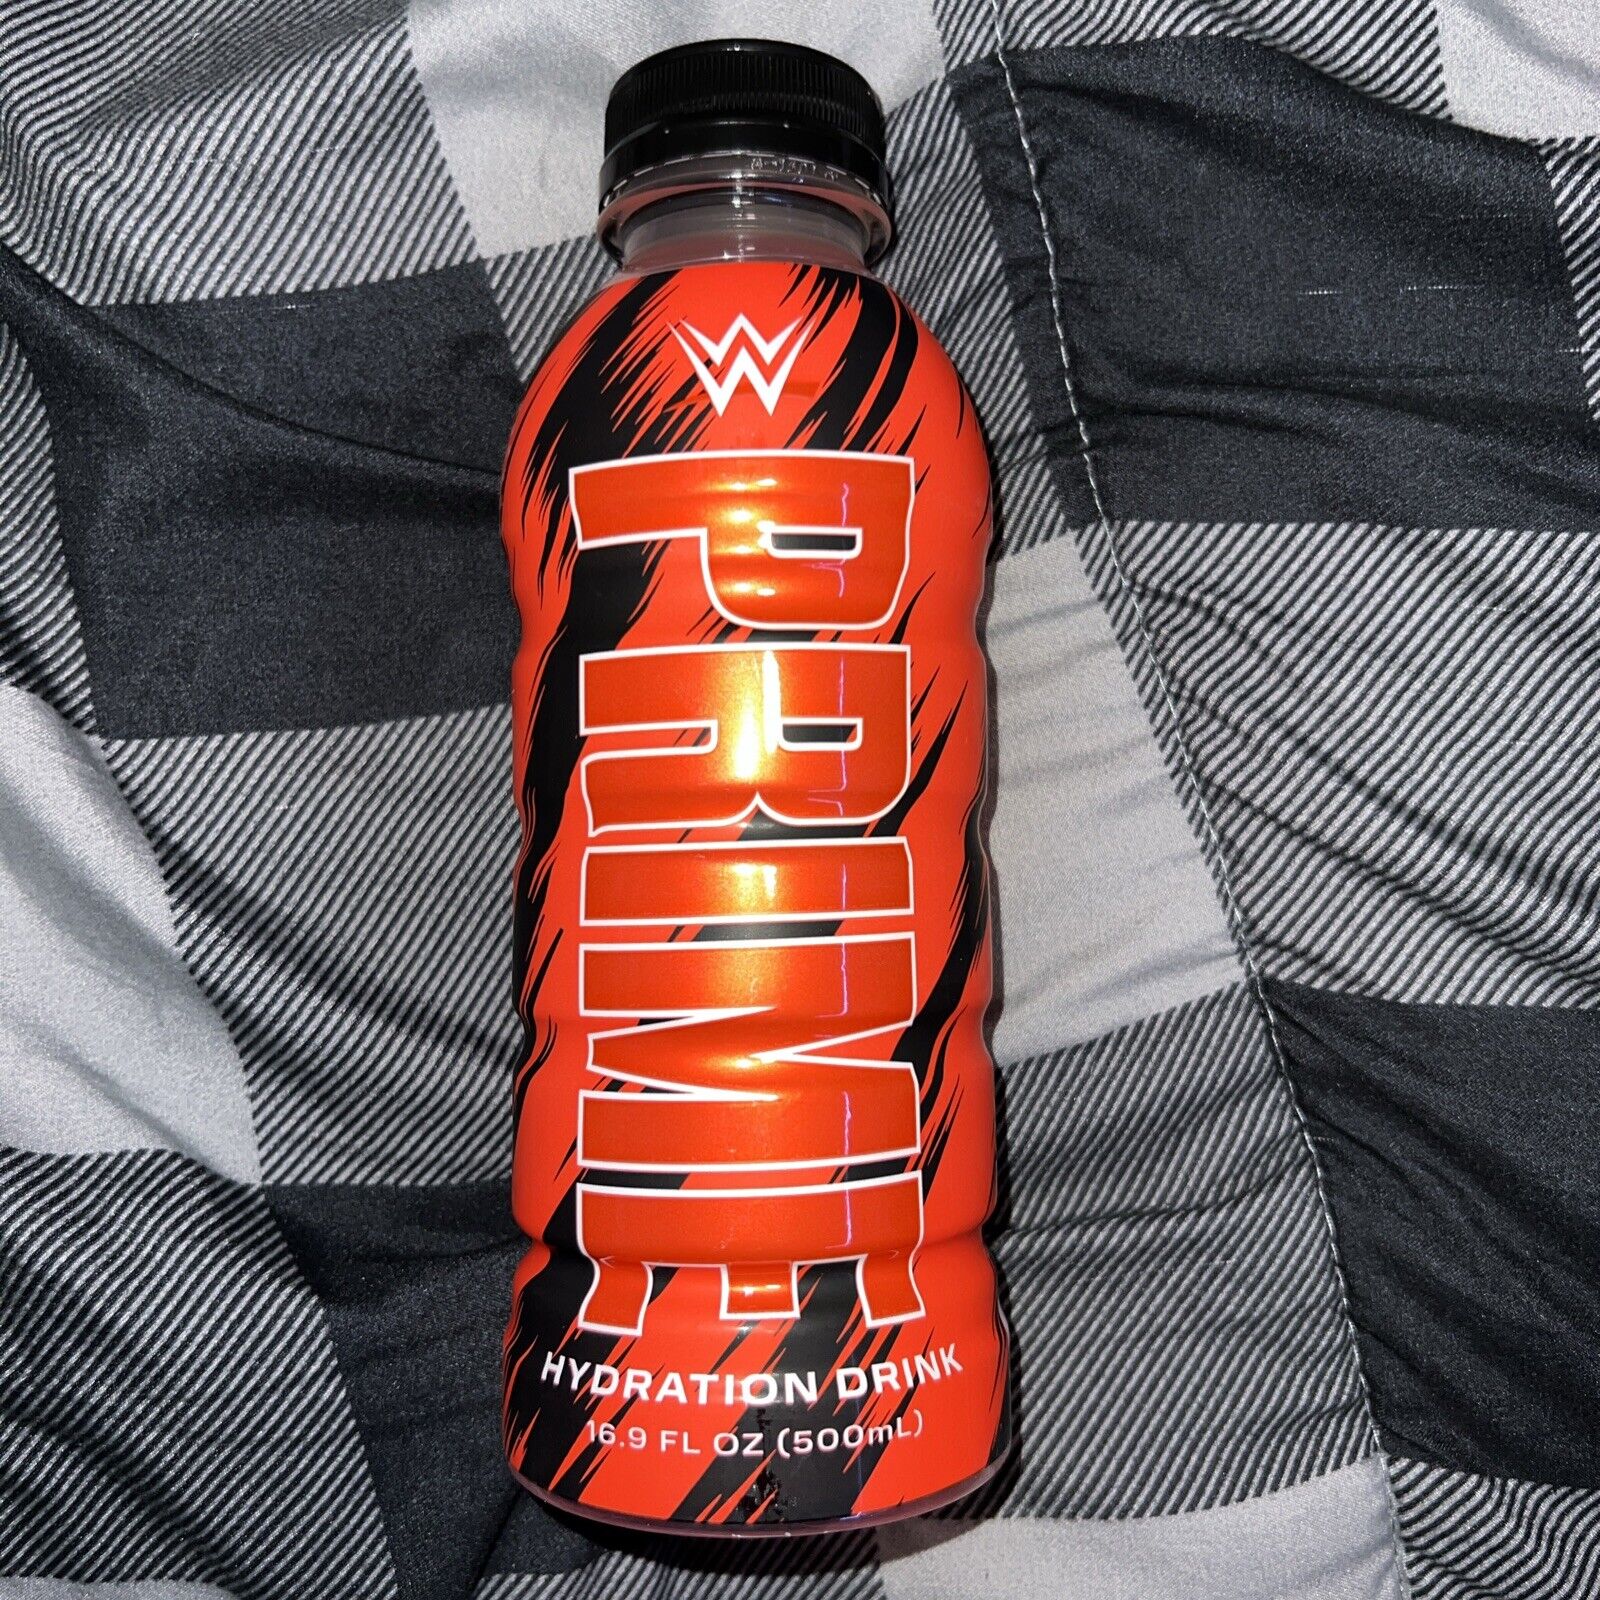 Prime Hydration WWE Bottle Unopened (IN HAND) US SHIP ONLY